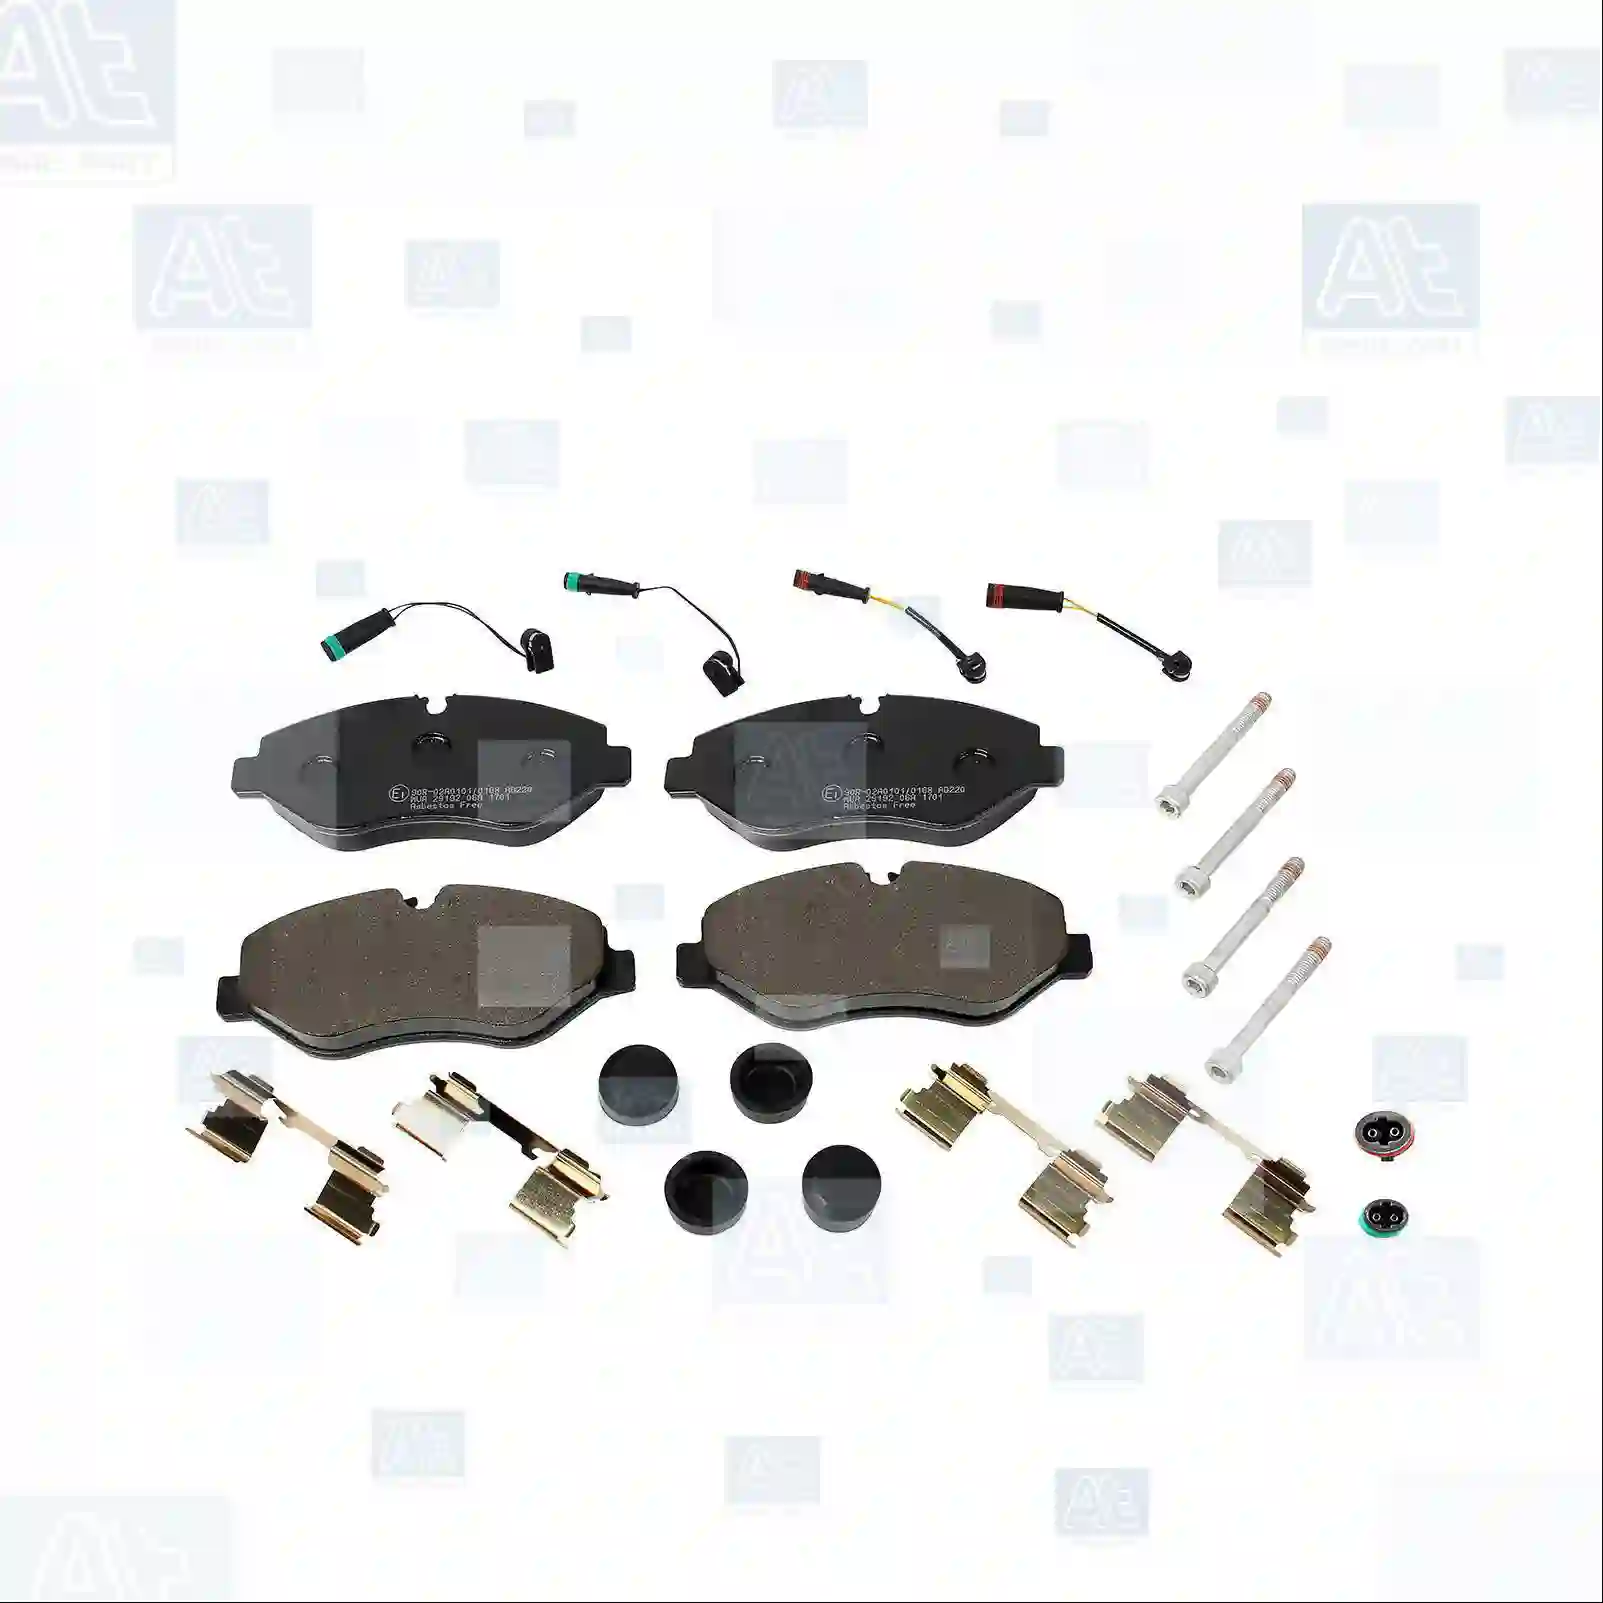 Disc brake pad kit, with accessories, at no 77715572, oem no: 2E0698151, 2E0698151B, 2E0698151E, 2E0698151, 68006732AA, 68006732AB, 68006732AC, 68055461AA, 0004230230, 0004230430, 0004320430, 0034205120, 0034206220, 0034209420, 0044204420, 0044204720, 0044204920, 0044205220, 0044206720, 0044207820, 0044208320, 0054202120, 0054204120, 0054205220, 0054206120, 0054206720, 0054207020, 0054207920, 0054209320, 0054209420, 0064200120, 0064208420, 0074201020, 0084205020, 1644201520, 1644201920, 9064210010, 9064210400, 5001868606, 2E0698151, 2E0698151B, 2E0698151E, 2E0698151, 2E0698151B, 2E0698151E, 2E0698151, 2E0698151B, 2E0698151E, JZW698151AB At Spare Part | Engine, Accelerator Pedal, Camshaft, Connecting Rod, Crankcase, Crankshaft, Cylinder Head, Engine Suspension Mountings, Exhaust Manifold, Exhaust Gas Recirculation, Filter Kits, Flywheel Housing, General Overhaul Kits, Engine, Intake Manifold, Oil Cleaner, Oil Cooler, Oil Filter, Oil Pump, Oil Sump, Piston & Liner, Sensor & Switch, Timing Case, Turbocharger, Cooling System, Belt Tensioner, Coolant Filter, Coolant Pipe, Corrosion Prevention Agent, Drive, Expansion Tank, Fan, Intercooler, Monitors & Gauges, Radiator, Thermostat, V-Belt / Timing belt, Water Pump, Fuel System, Electronical Injector Unit, Feed Pump, Fuel Filter, cpl., Fuel Gauge Sender,  Fuel Line, Fuel Pump, Fuel Tank, Injection Line Kit, Injection Pump, Exhaust System, Clutch & Pedal, Gearbox, Propeller Shaft, Axles, Brake System, Hubs & Wheels, Suspension, Leaf Spring, Universal Parts / Accessories, Steering, Electrical System, Cabin Disc brake pad kit, with accessories, at no 77715572, oem no: 2E0698151, 2E0698151B, 2E0698151E, 2E0698151, 68006732AA, 68006732AB, 68006732AC, 68055461AA, 0004230230, 0004230430, 0004320430, 0034205120, 0034206220, 0034209420, 0044204420, 0044204720, 0044204920, 0044205220, 0044206720, 0044207820, 0044208320, 0054202120, 0054204120, 0054205220, 0054206120, 0054206720, 0054207020, 0054207920, 0054209320, 0054209420, 0064200120, 0064208420, 0074201020, 0084205020, 1644201520, 1644201920, 9064210010, 9064210400, 5001868606, 2E0698151, 2E0698151B, 2E0698151E, 2E0698151, 2E0698151B, 2E0698151E, 2E0698151, 2E0698151B, 2E0698151E, JZW698151AB At Spare Part | Engine, Accelerator Pedal, Camshaft, Connecting Rod, Crankcase, Crankshaft, Cylinder Head, Engine Suspension Mountings, Exhaust Manifold, Exhaust Gas Recirculation, Filter Kits, Flywheel Housing, General Overhaul Kits, Engine, Intake Manifold, Oil Cleaner, Oil Cooler, Oil Filter, Oil Pump, Oil Sump, Piston & Liner, Sensor & Switch, Timing Case, Turbocharger, Cooling System, Belt Tensioner, Coolant Filter, Coolant Pipe, Corrosion Prevention Agent, Drive, Expansion Tank, Fan, Intercooler, Monitors & Gauges, Radiator, Thermostat, V-Belt / Timing belt, Water Pump, Fuel System, Electronical Injector Unit, Feed Pump, Fuel Filter, cpl., Fuel Gauge Sender,  Fuel Line, Fuel Pump, Fuel Tank, Injection Line Kit, Injection Pump, Exhaust System, Clutch & Pedal, Gearbox, Propeller Shaft, Axles, Brake System, Hubs & Wheels, Suspension, Leaf Spring, Universal Parts / Accessories, Steering, Electrical System, Cabin